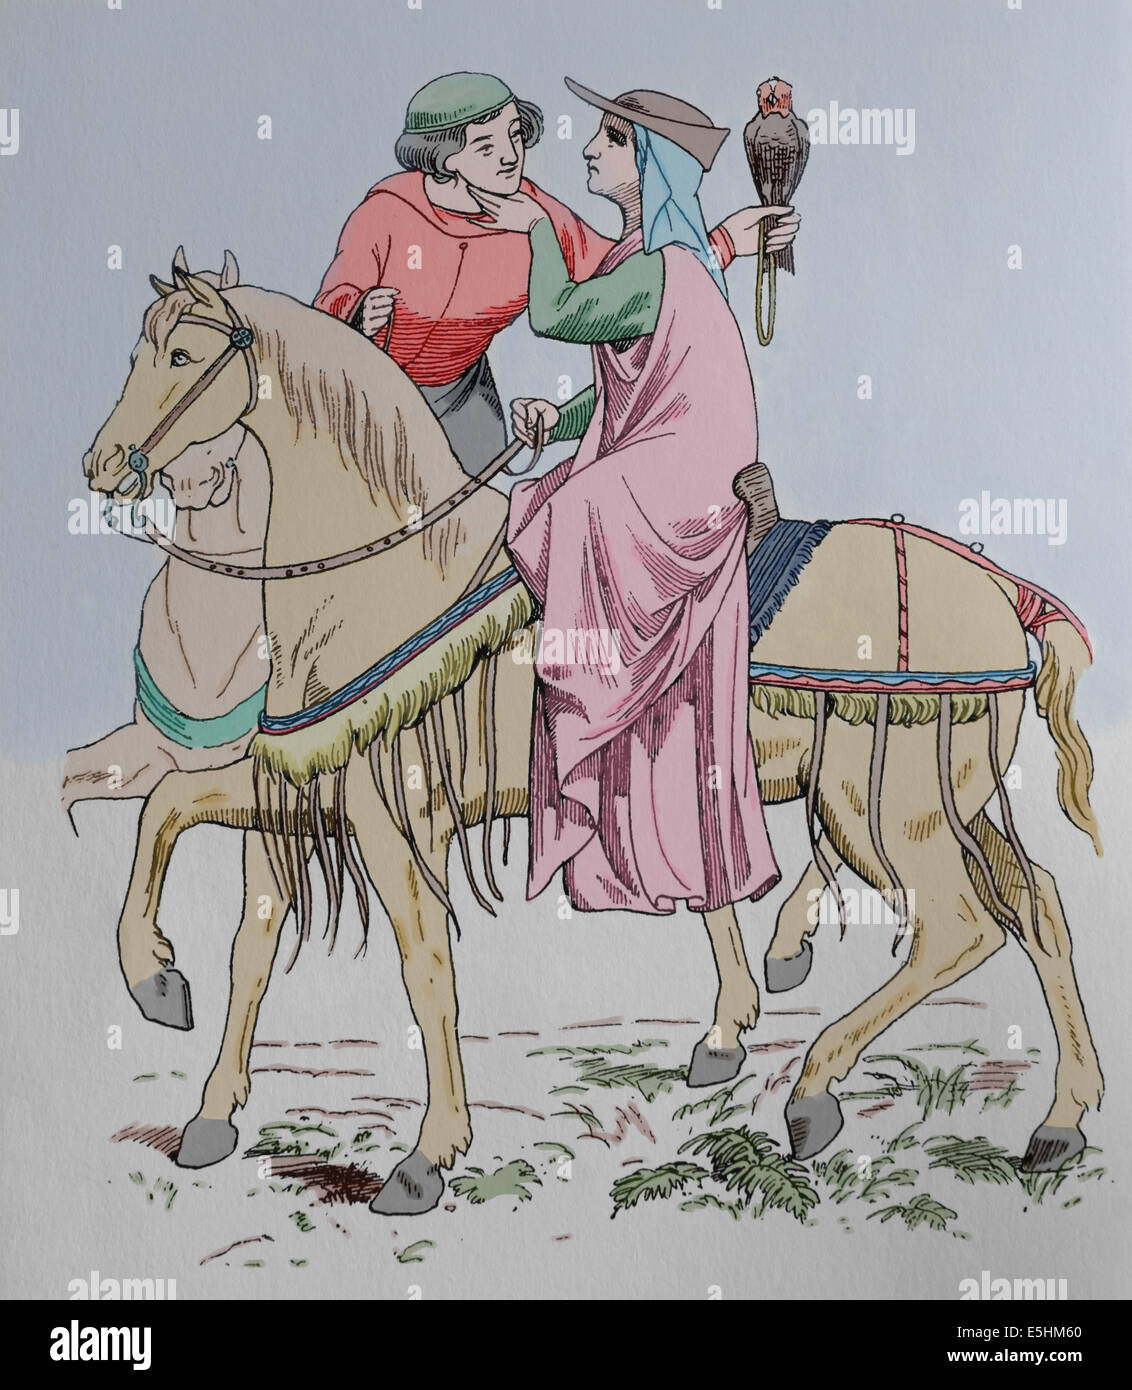 Europe. Hunting couple, early 14th century. Middle Ages. Engraving. 19th century. Later colouration. Stock Photo